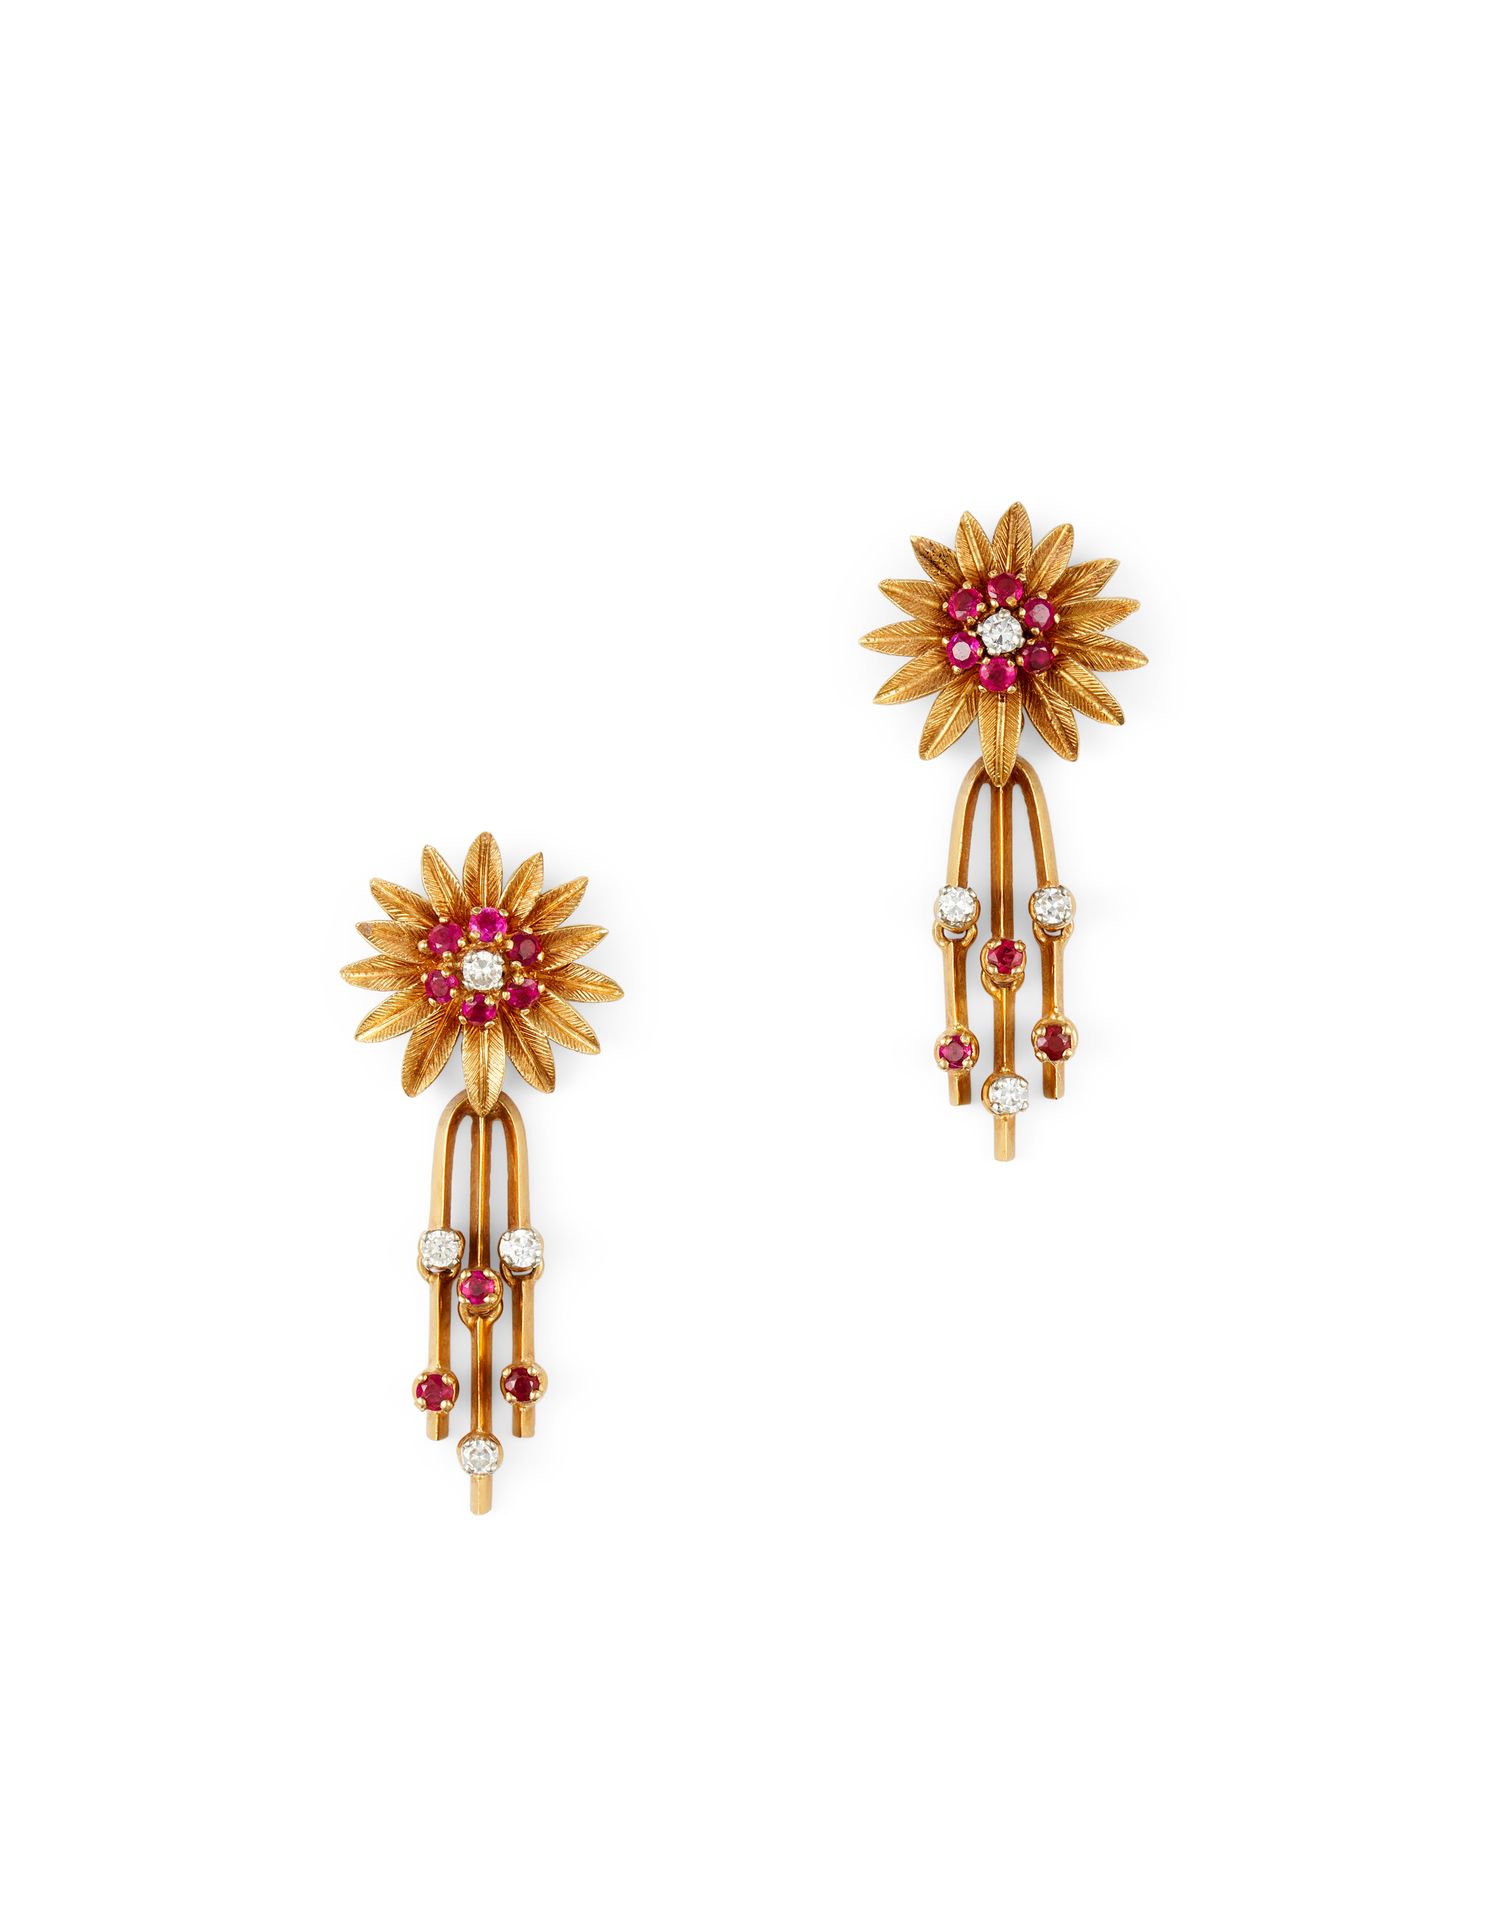 Null 1950'S RUBY EARRINGS In 18K yellow gold, the flower set with rubies surroun&hellip;